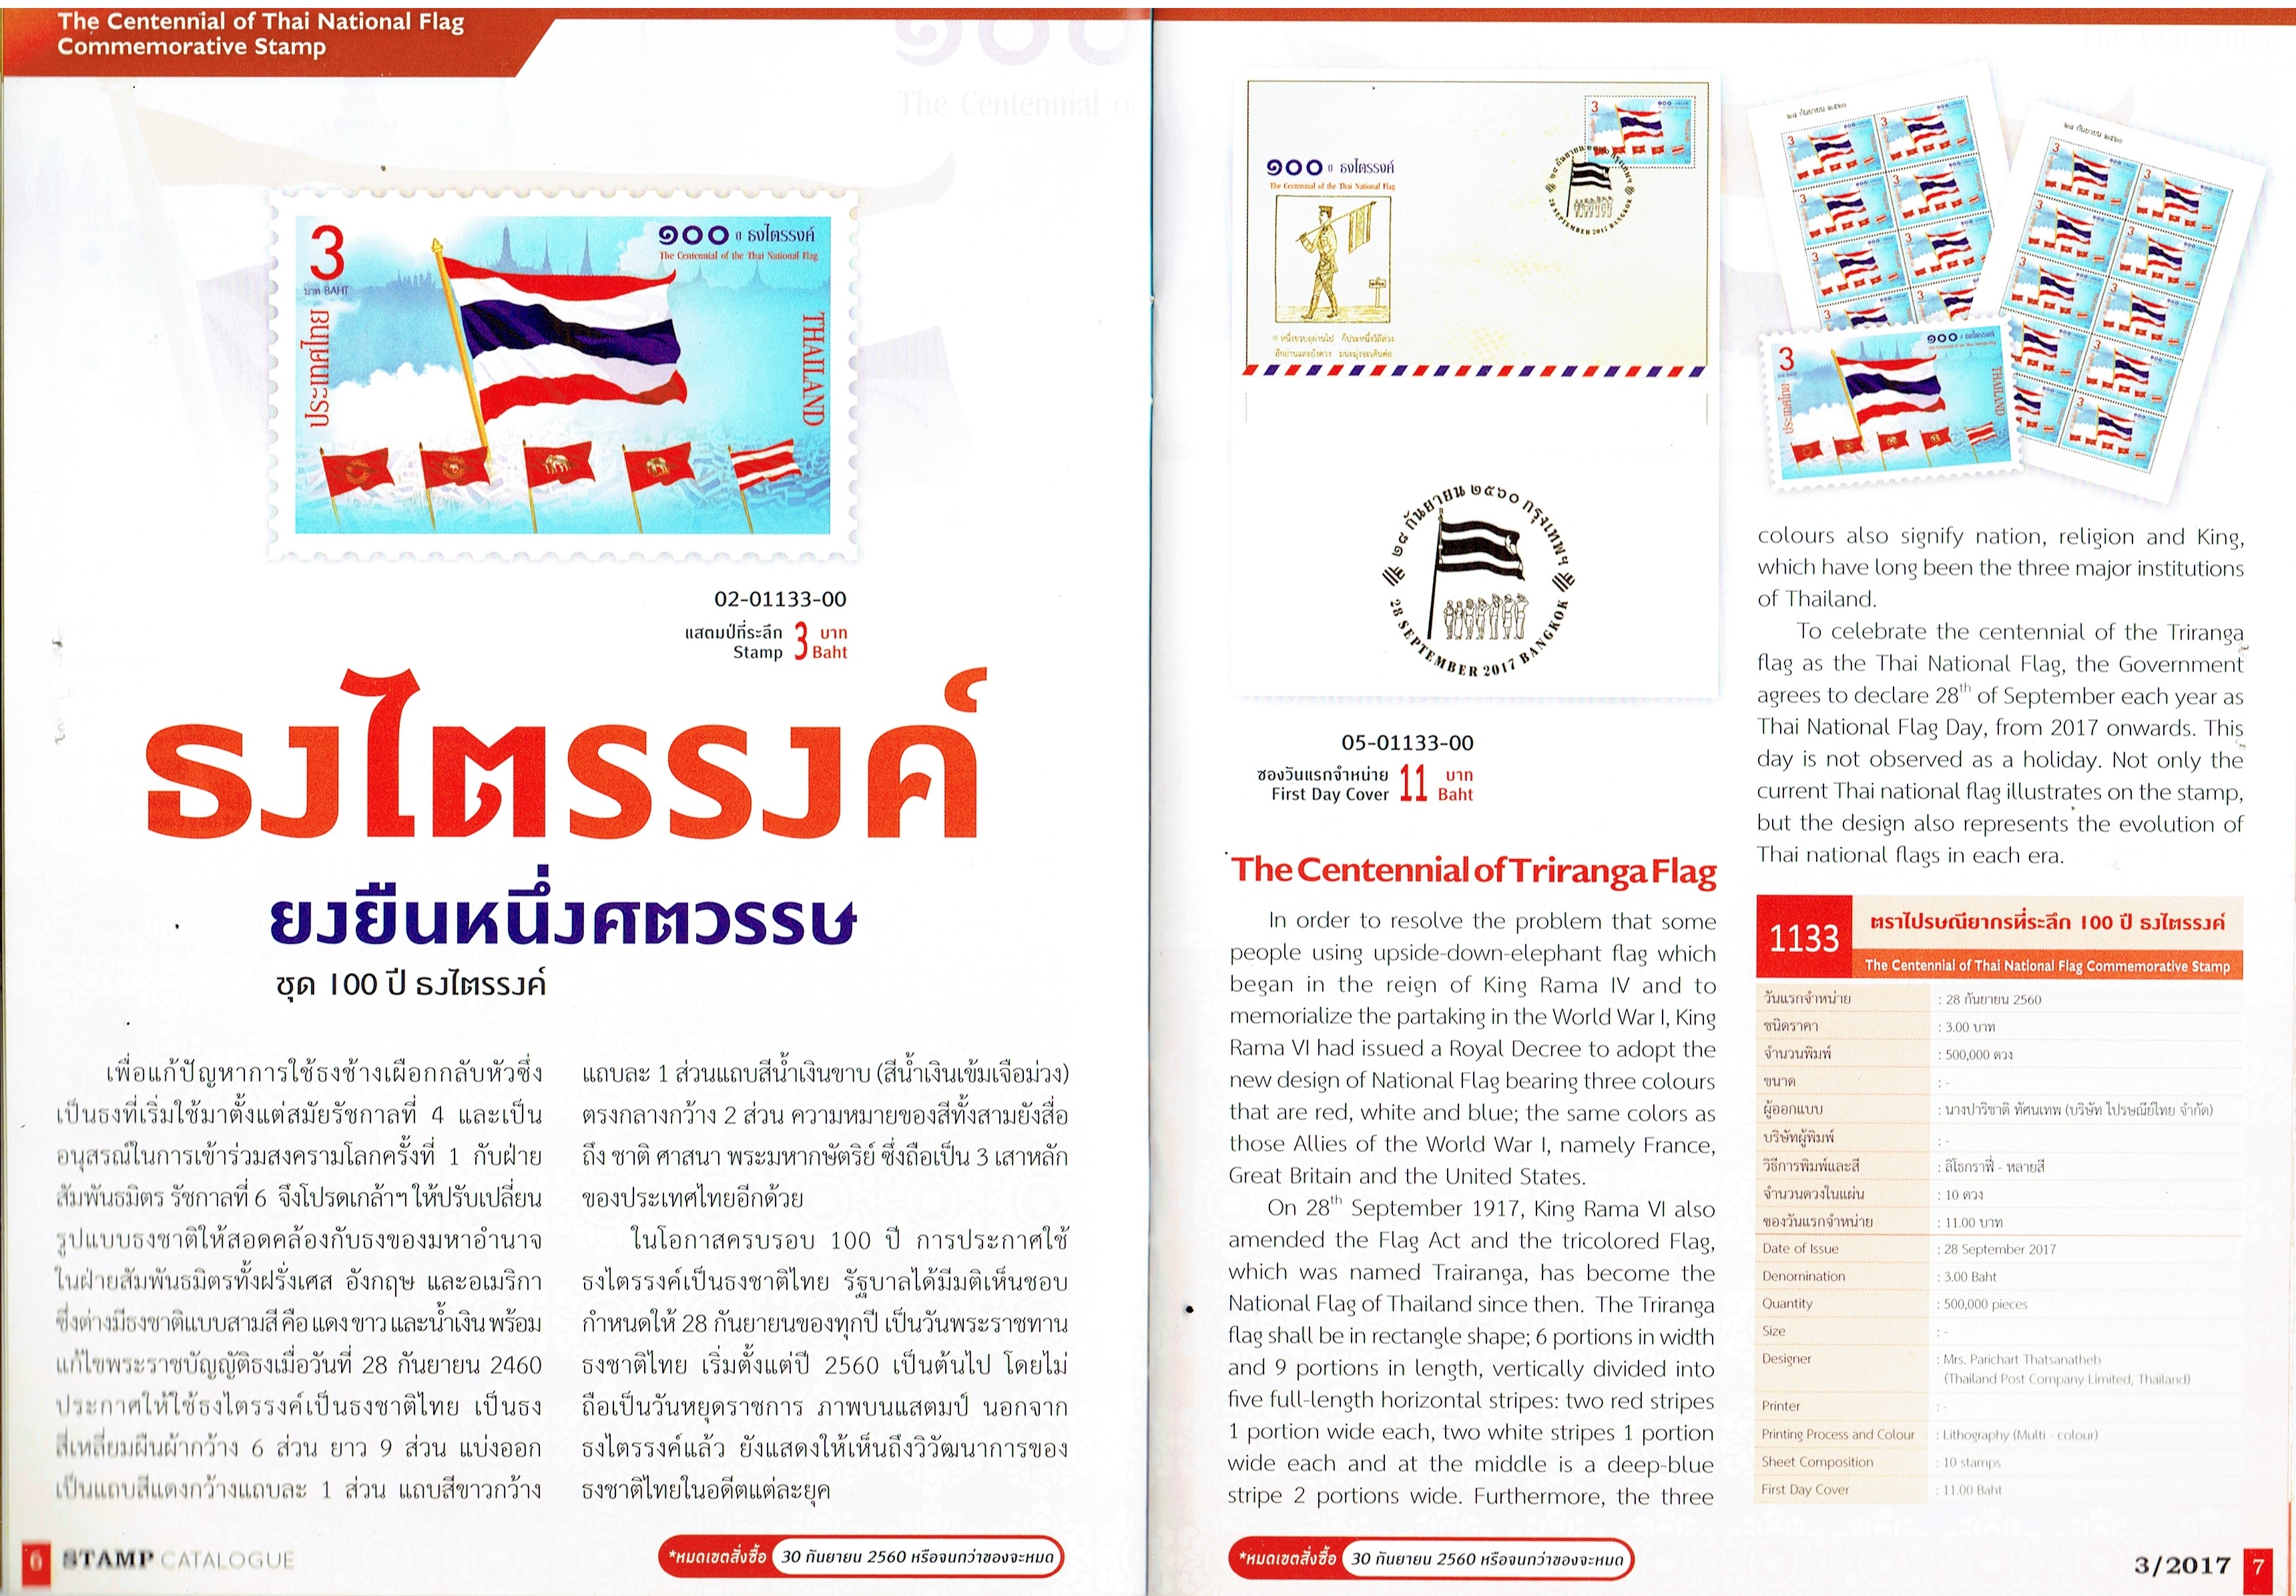 Pages from Thailand Post stamp bulletin detailing the new #TH-1133, released September 28, 2017. I will order copies online because Phuket post offices are currently out of stamps to sell!